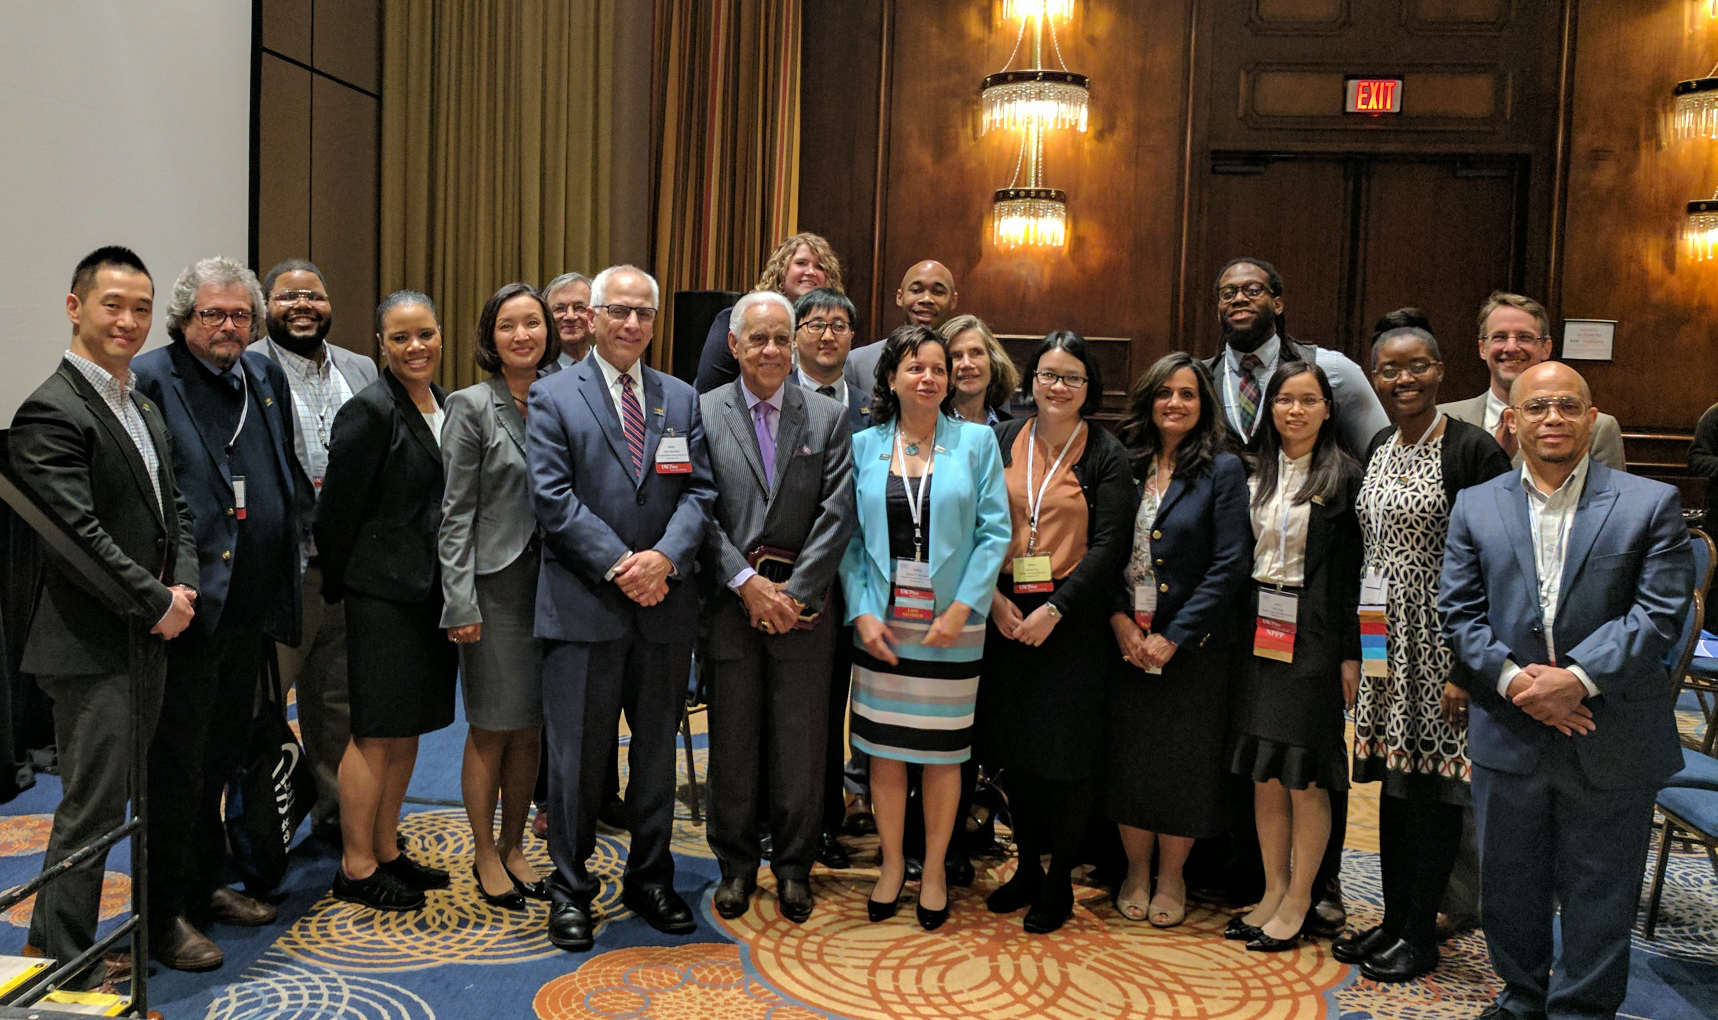 The Wilder School boasted a delegation of more than 20 faculty,students and alumni at the 2017 American Society for Public Administration Conference (ASPA) in Atlanta, Ga. March 16-21.